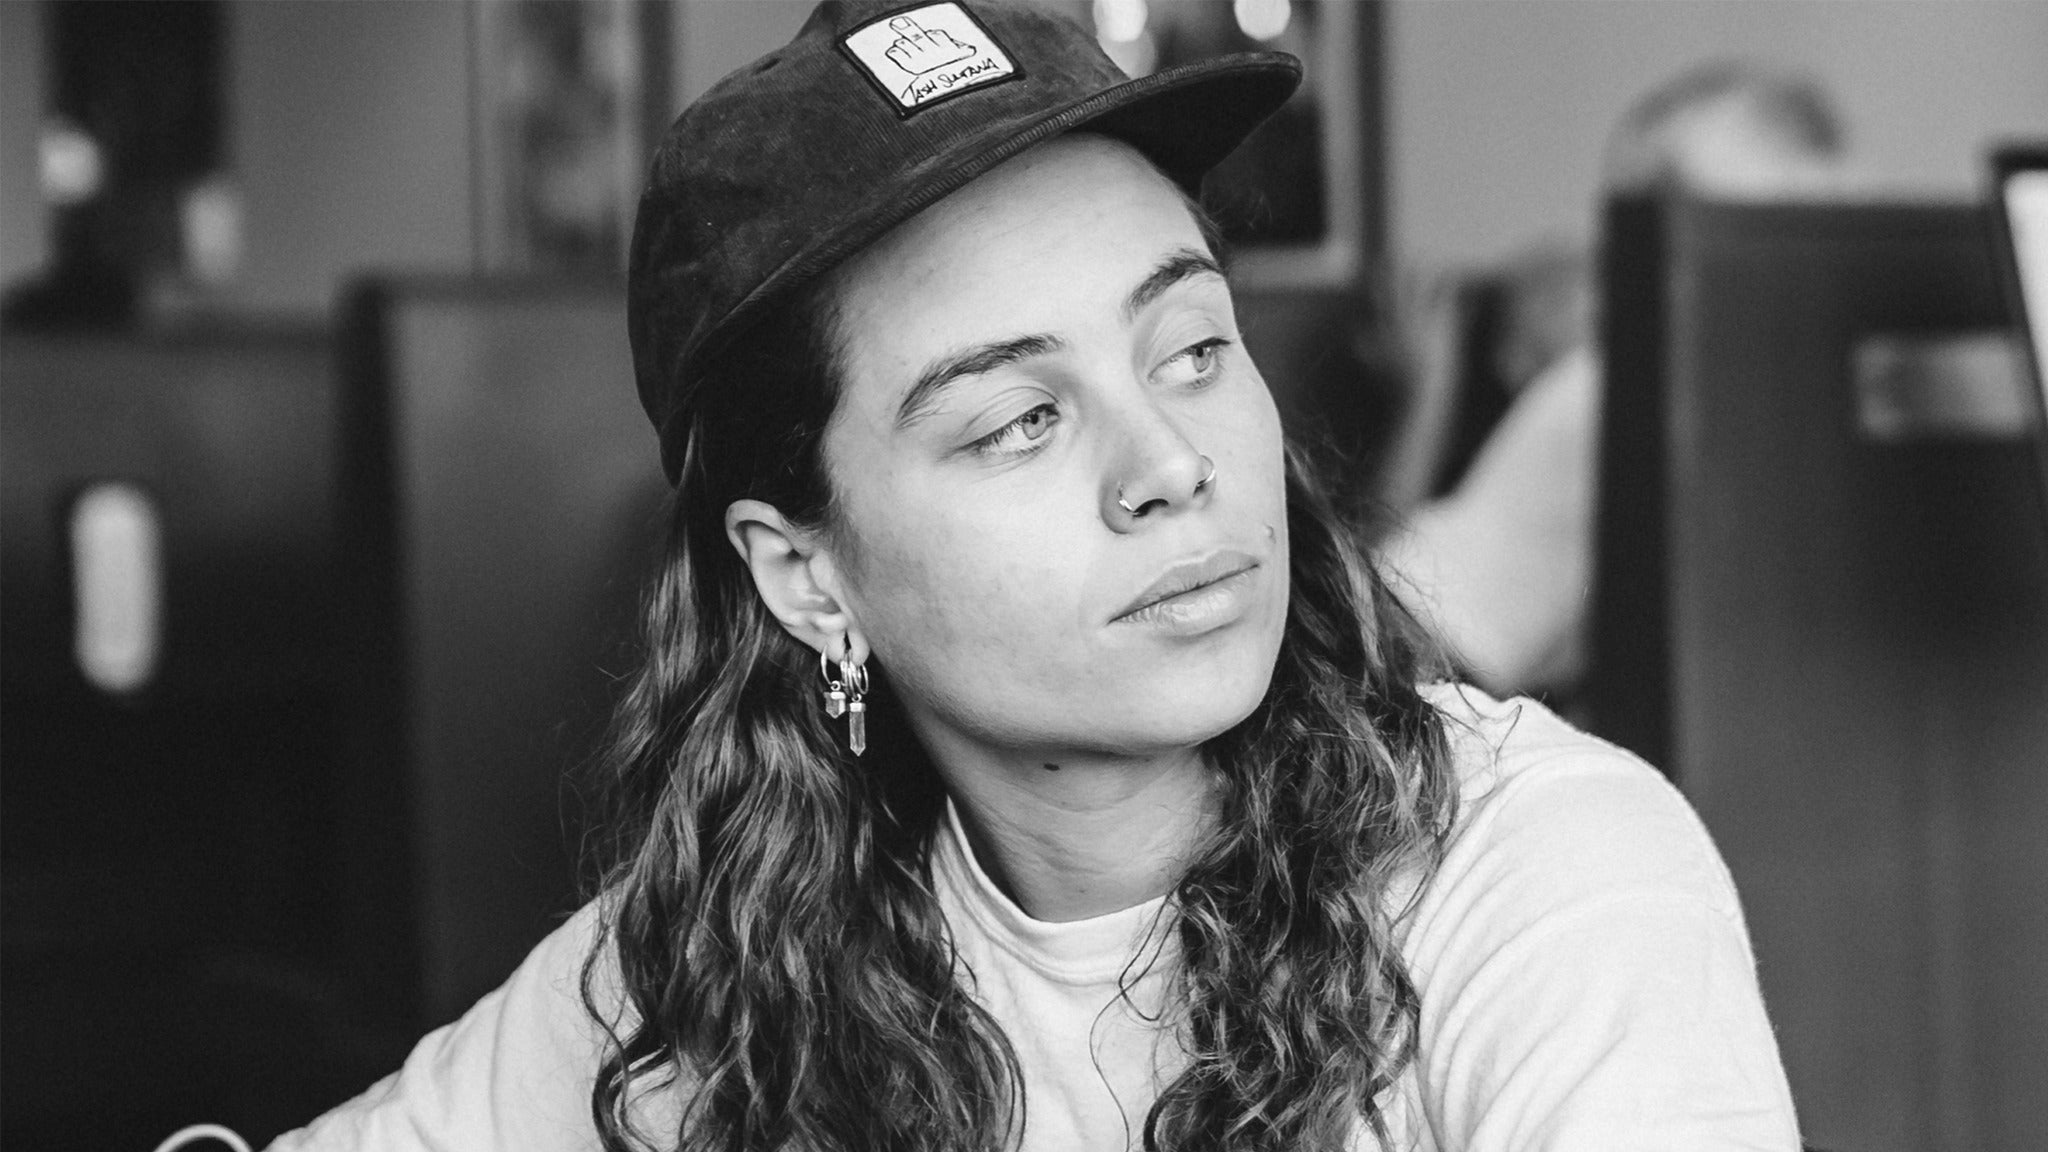 EVENT MOVED TO JACOB'S PAVILION: Tash Sultana in Cleveland promo photo for Citi® Cardmember Preferred presale offer code